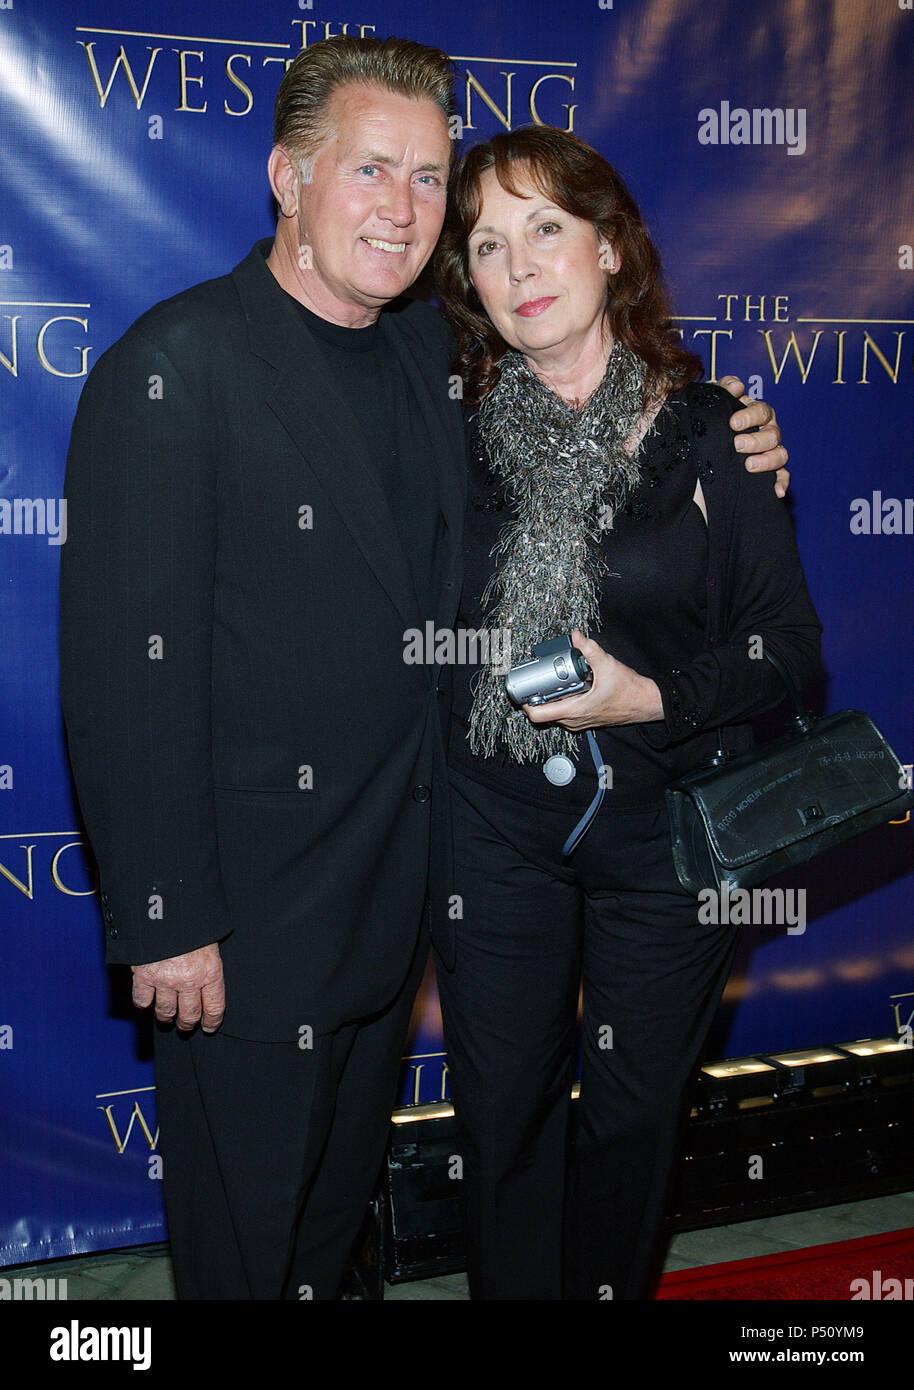 Martin Sheen and wife arriving at the party celebrating the   " West Wing 100th Episode " at the Four seasons Hotel in Los Angeles. November 1st 2003.           -            SheenMartin_wife29.jpgSheenMartin_wife29  Event in Hollywood Life - California, Red Carpet Event, USA, Film Industry, Celebrities, Photography, Bestof, Arts Culture and Entertainment, Topix Celebrities fashion, Best of, Hollywood Life, Event in Hollywood Life - California,  backstage trophy, Awards show, movie celebrities, TV celebrities, Music celebrities, Topix, Bestof, Arts Culture and Entertainment, Photography,    inq Stock Photo